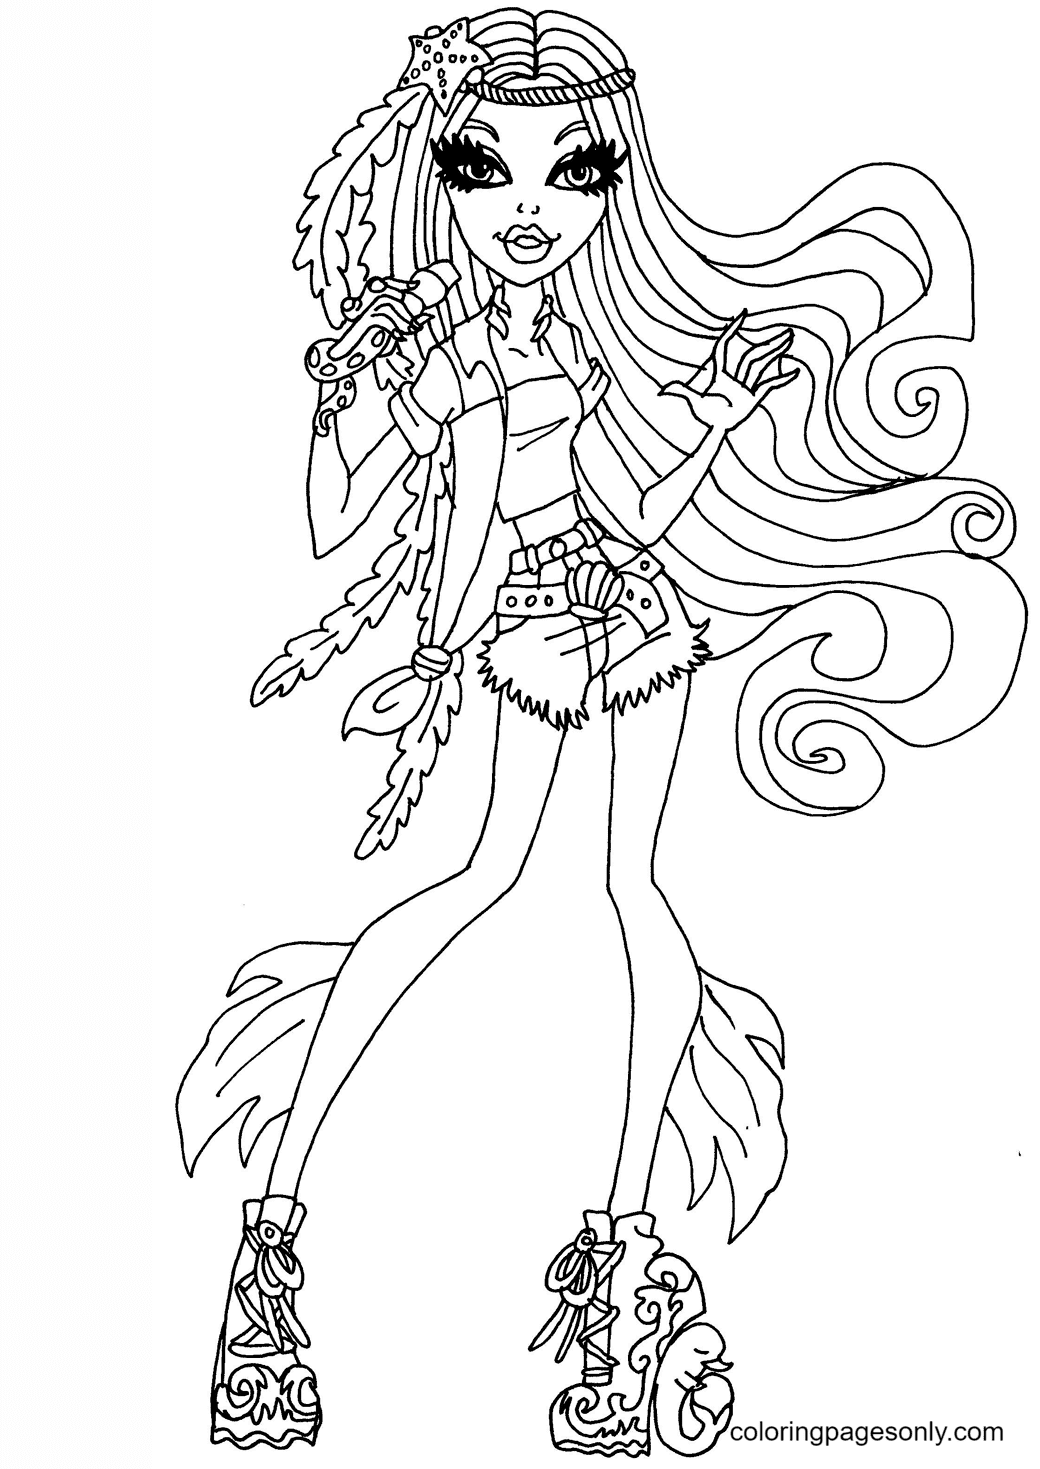 Madison Fear Coloring Page